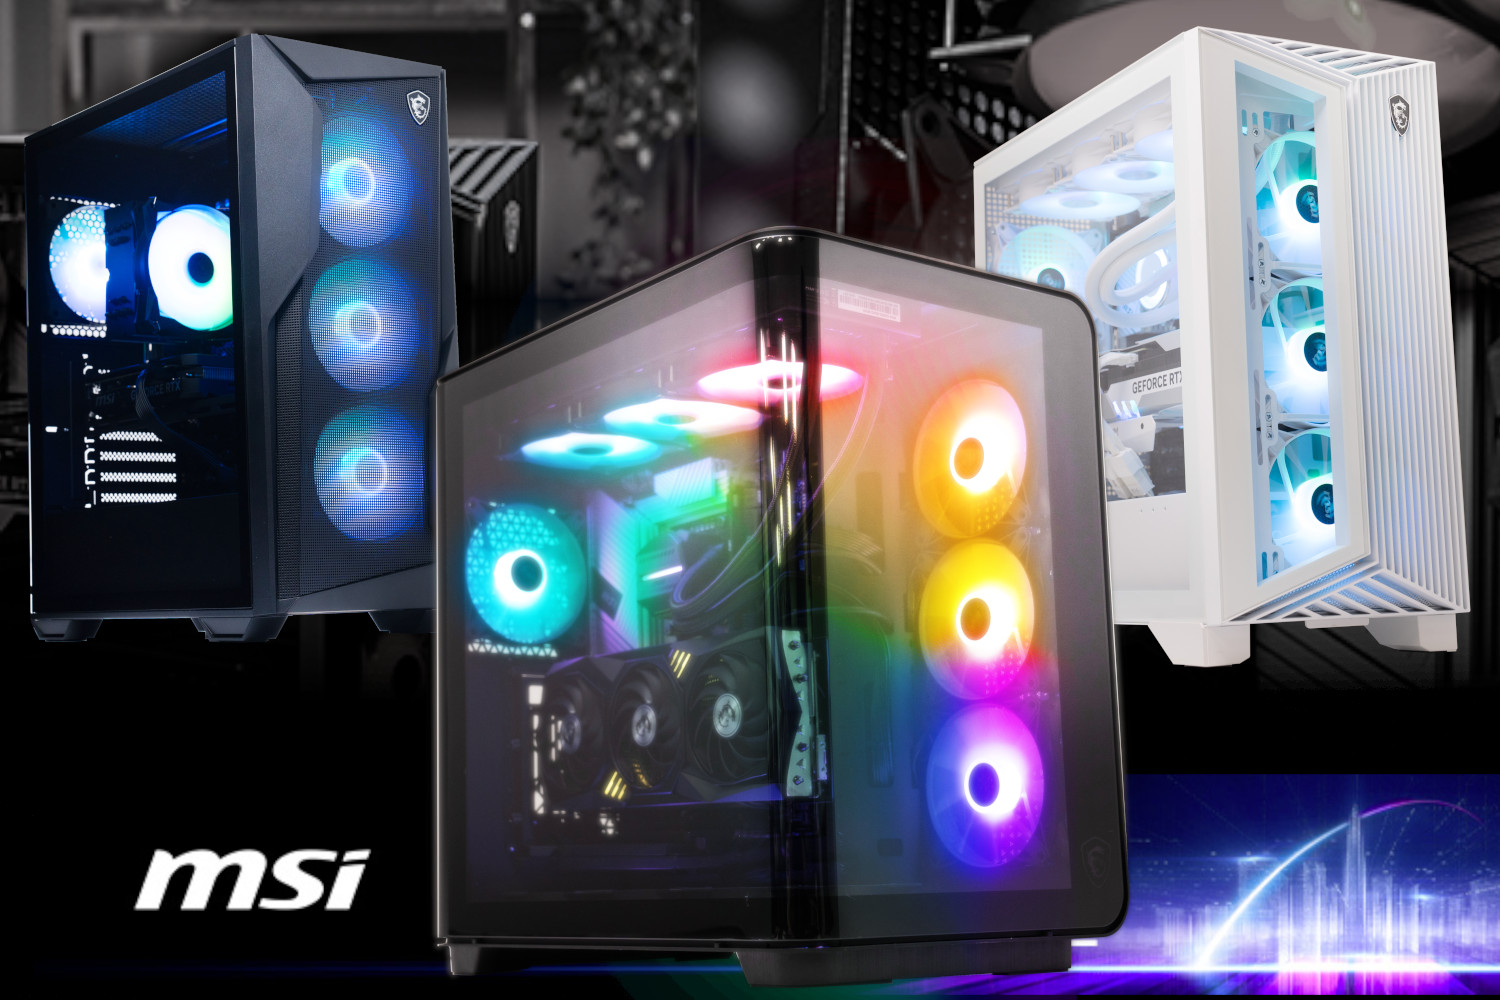 MSI debuts all-new Imaginative and prescient gaming PC alongside refreshed Aegis and Codex with excessive-airflow designs and AI integration